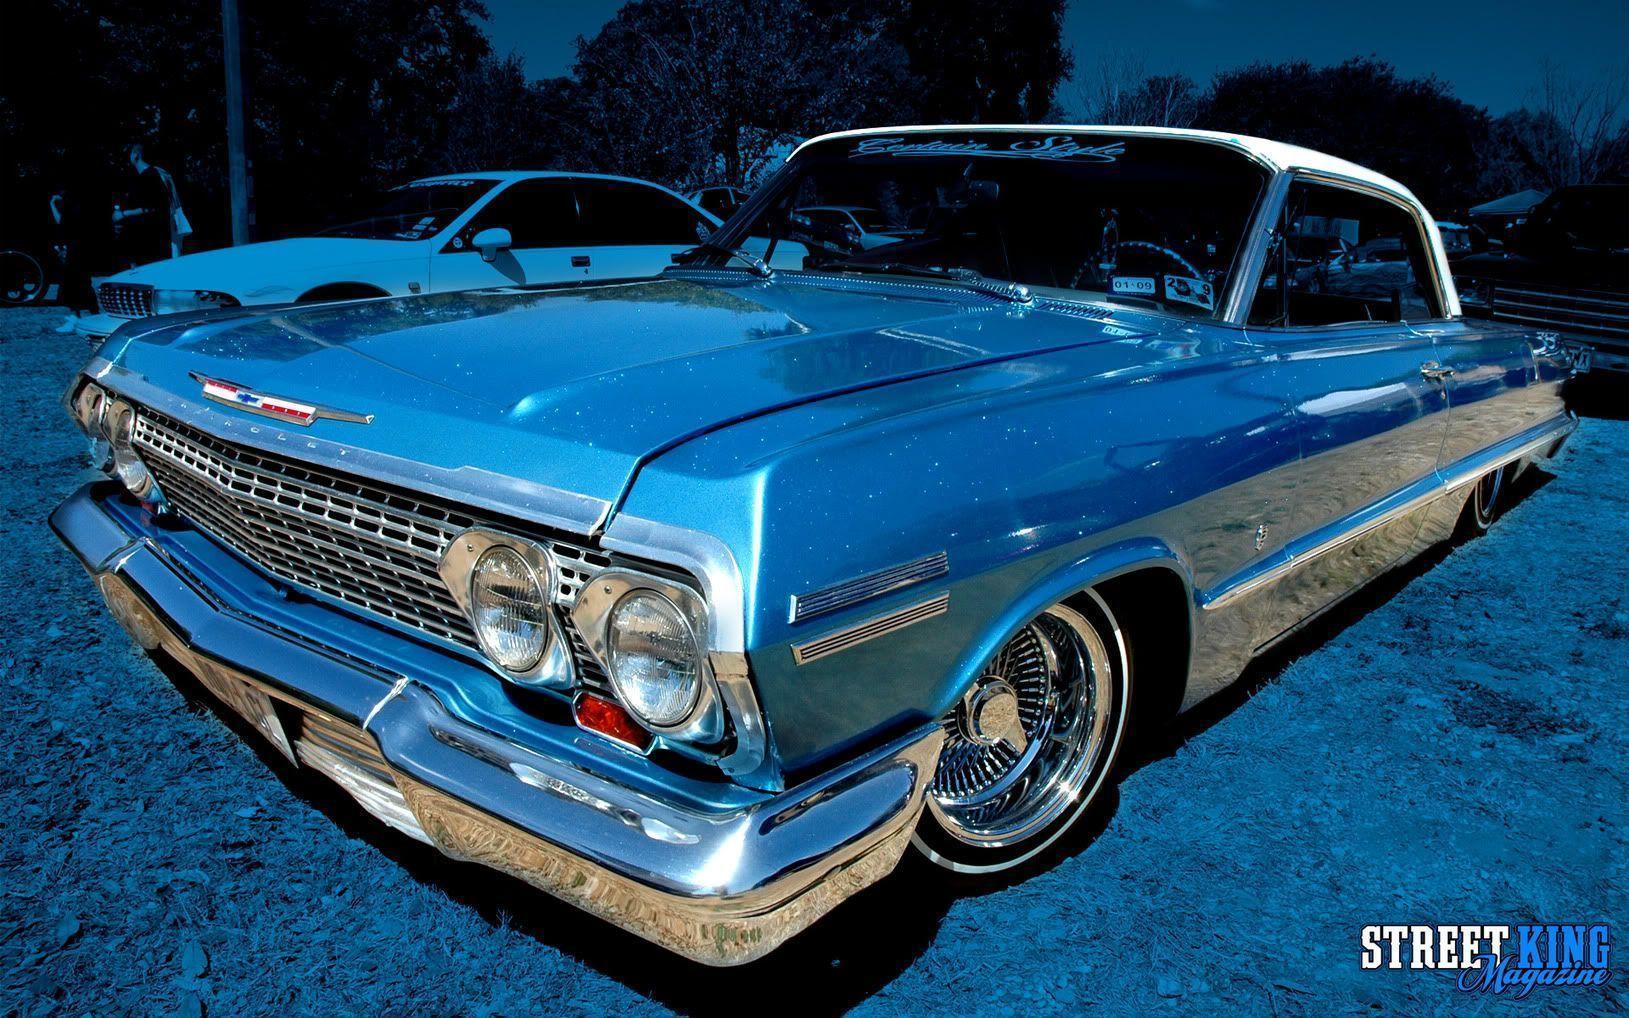 Gallery For gt Lowrider Wallpaper Impala